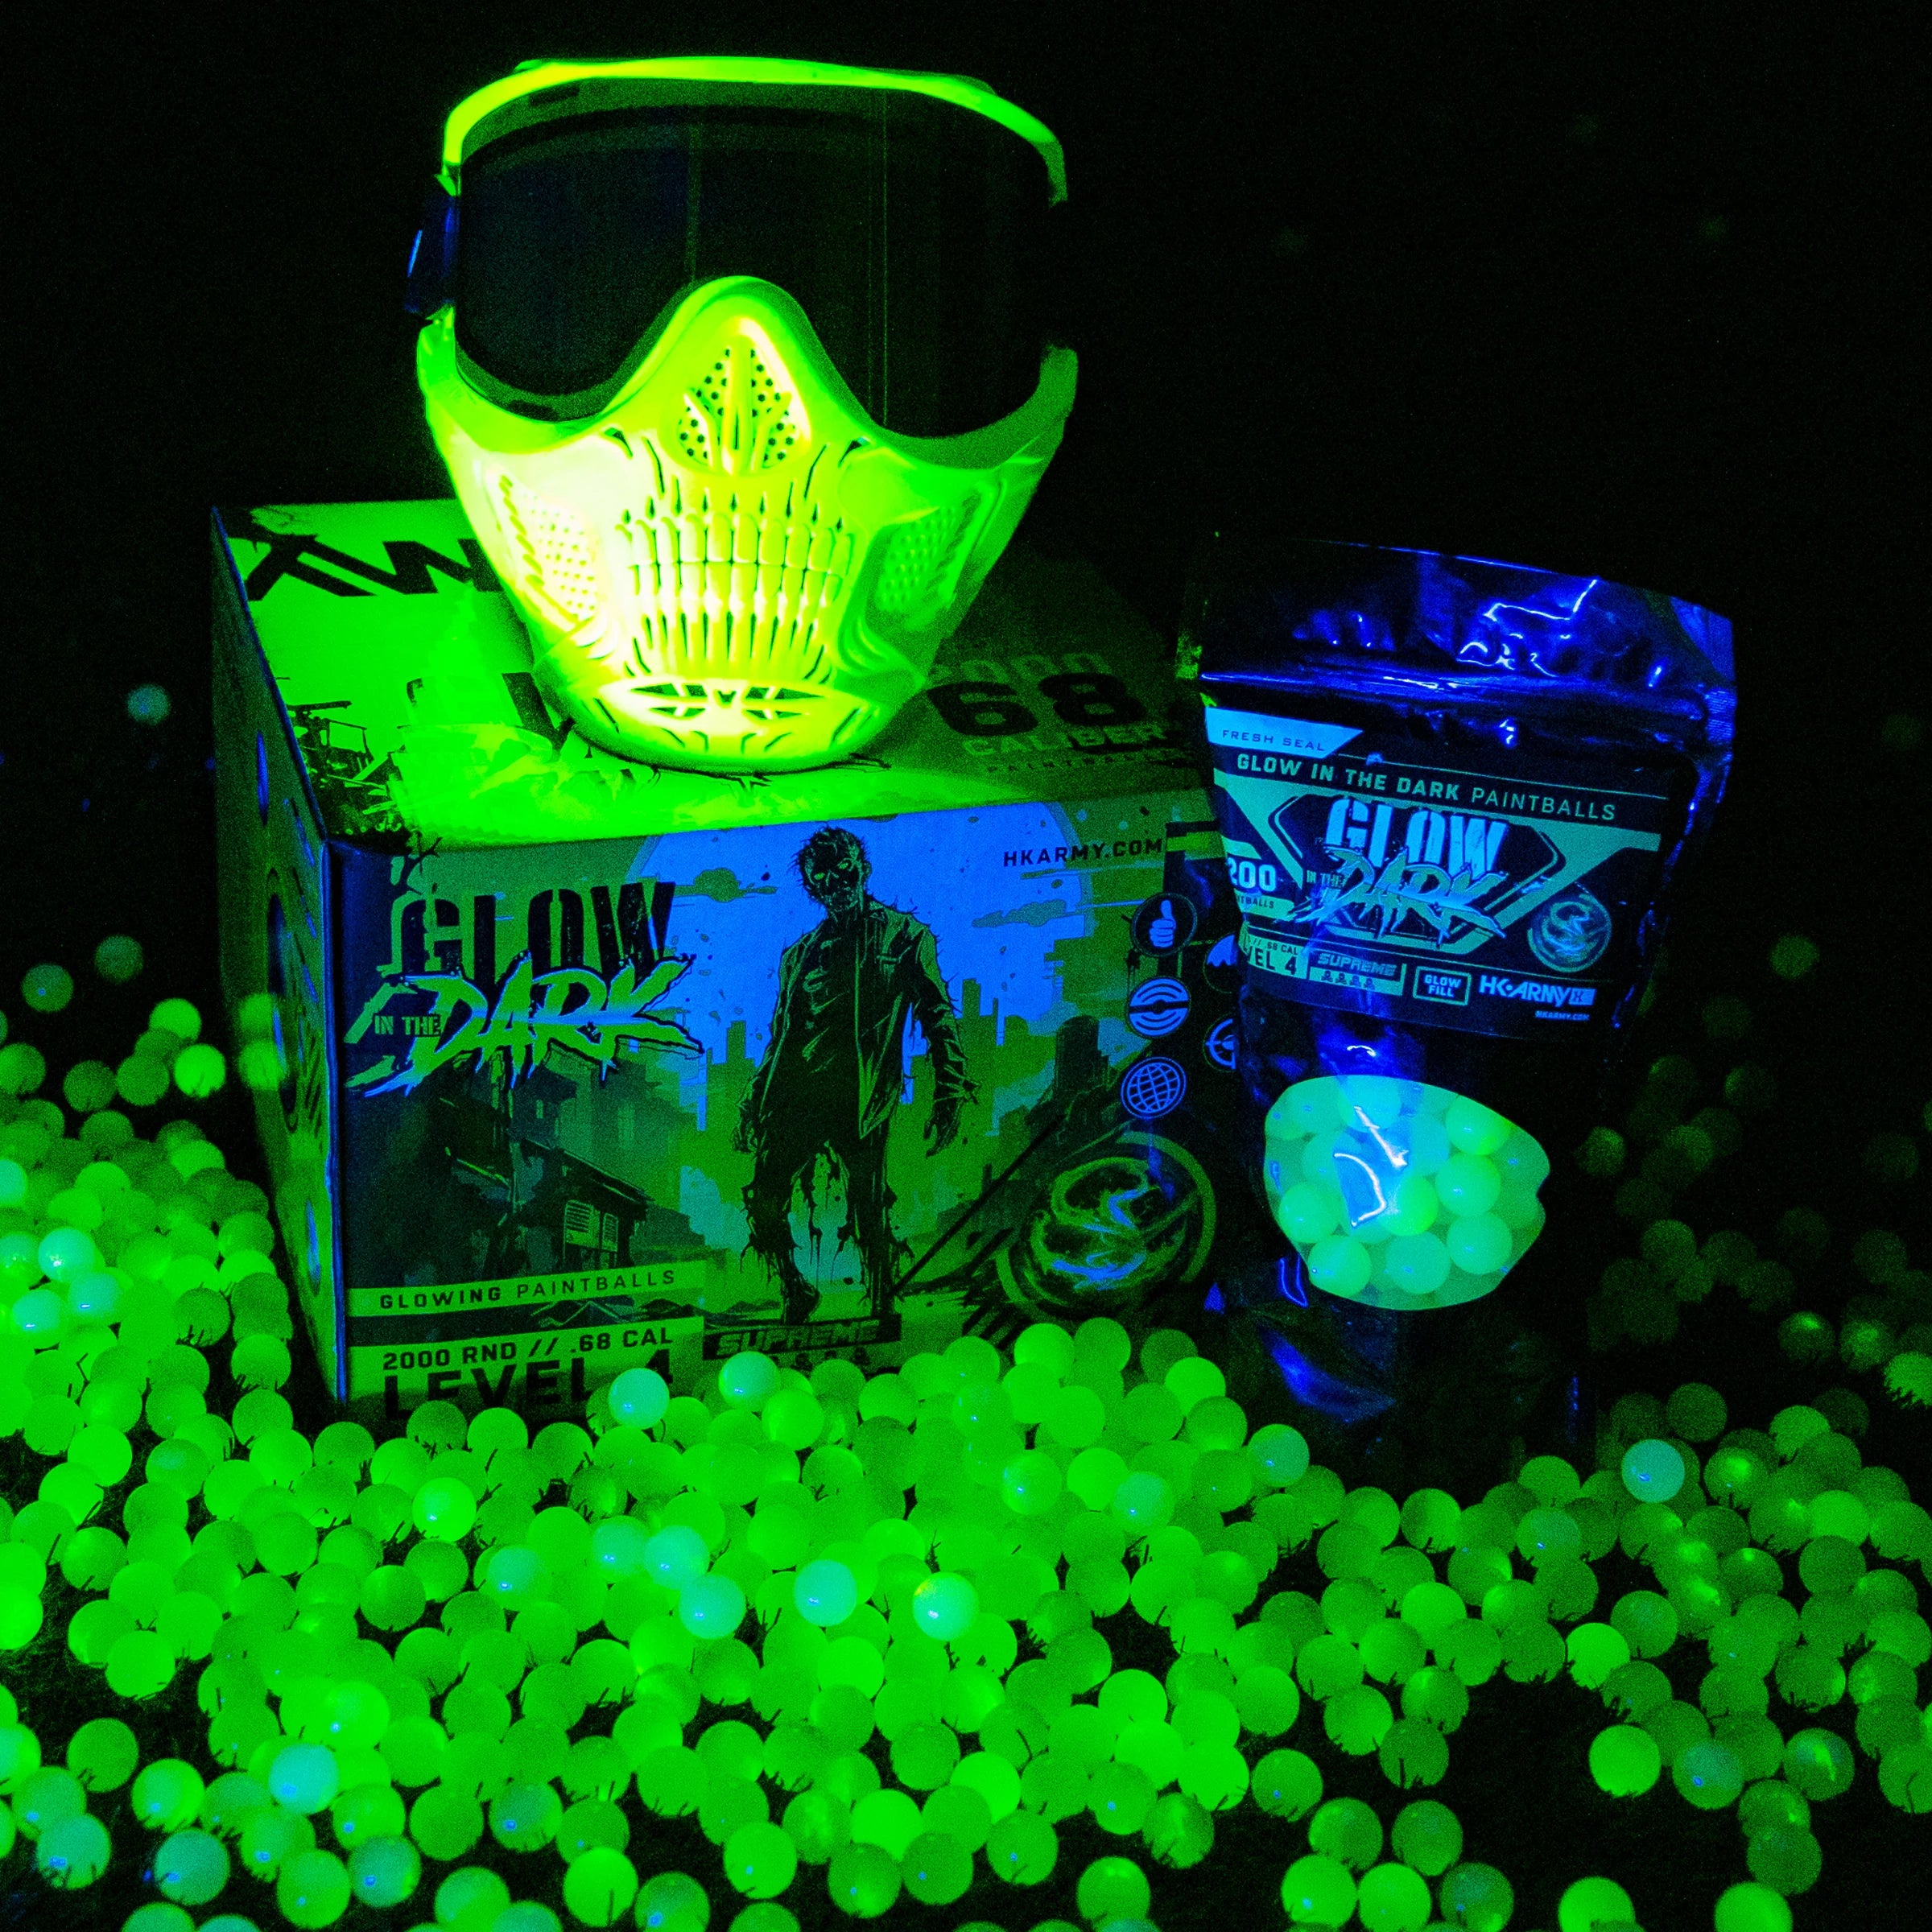 HK Army Glow-In-The-Dark Paintballs Level 4 (2000 Rounds) - ssairsoft.com